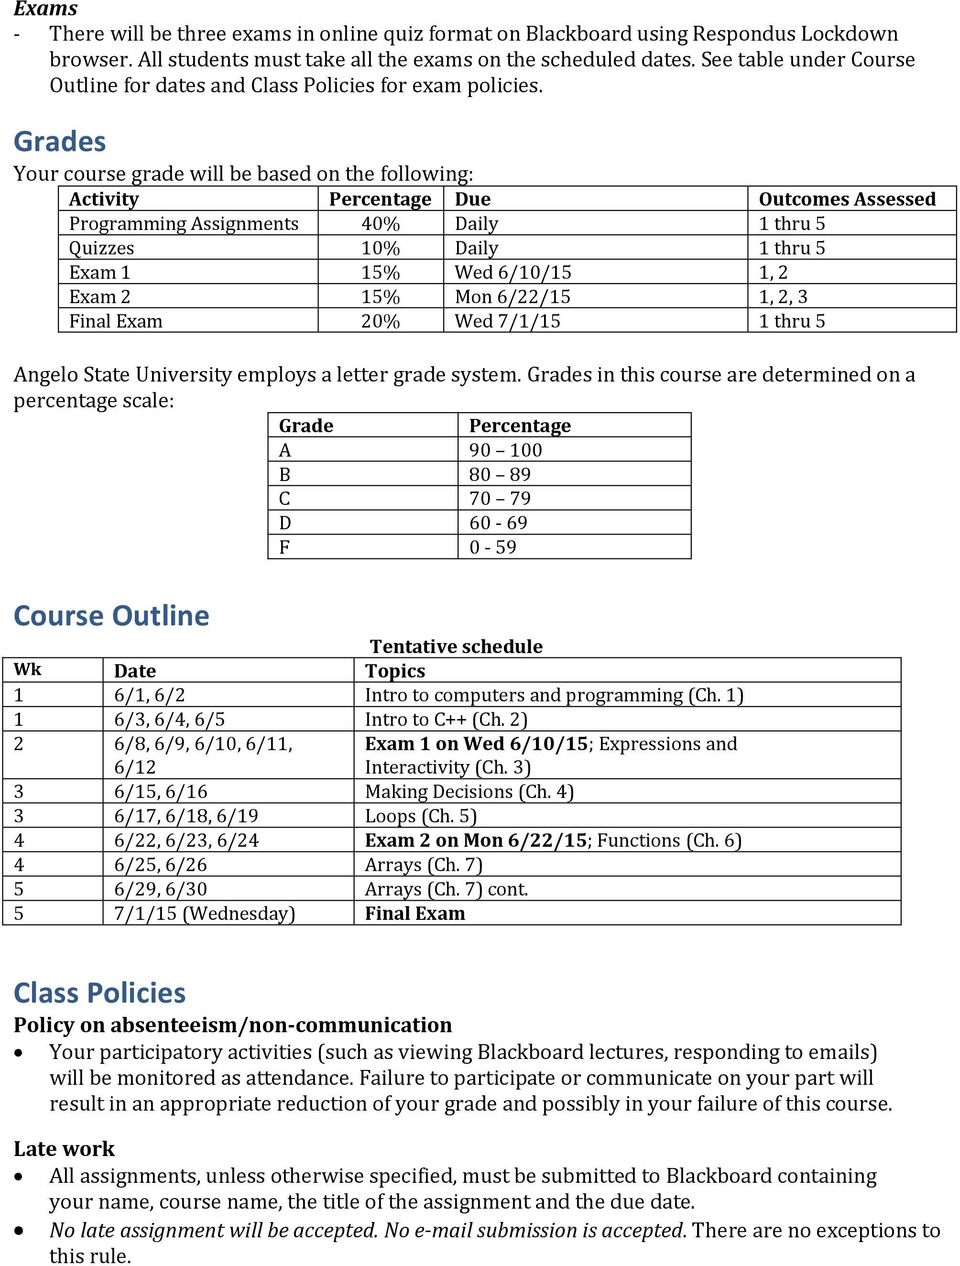 Grades Your course grade will be based on the following: Activity Percentage Due Outcomes Assessed Programming Assignments 40% Daily 1 thru 5 Quizzes 10% Daily 1 thru 5 Exam 1 15% Wed 6/10/15 1, 2